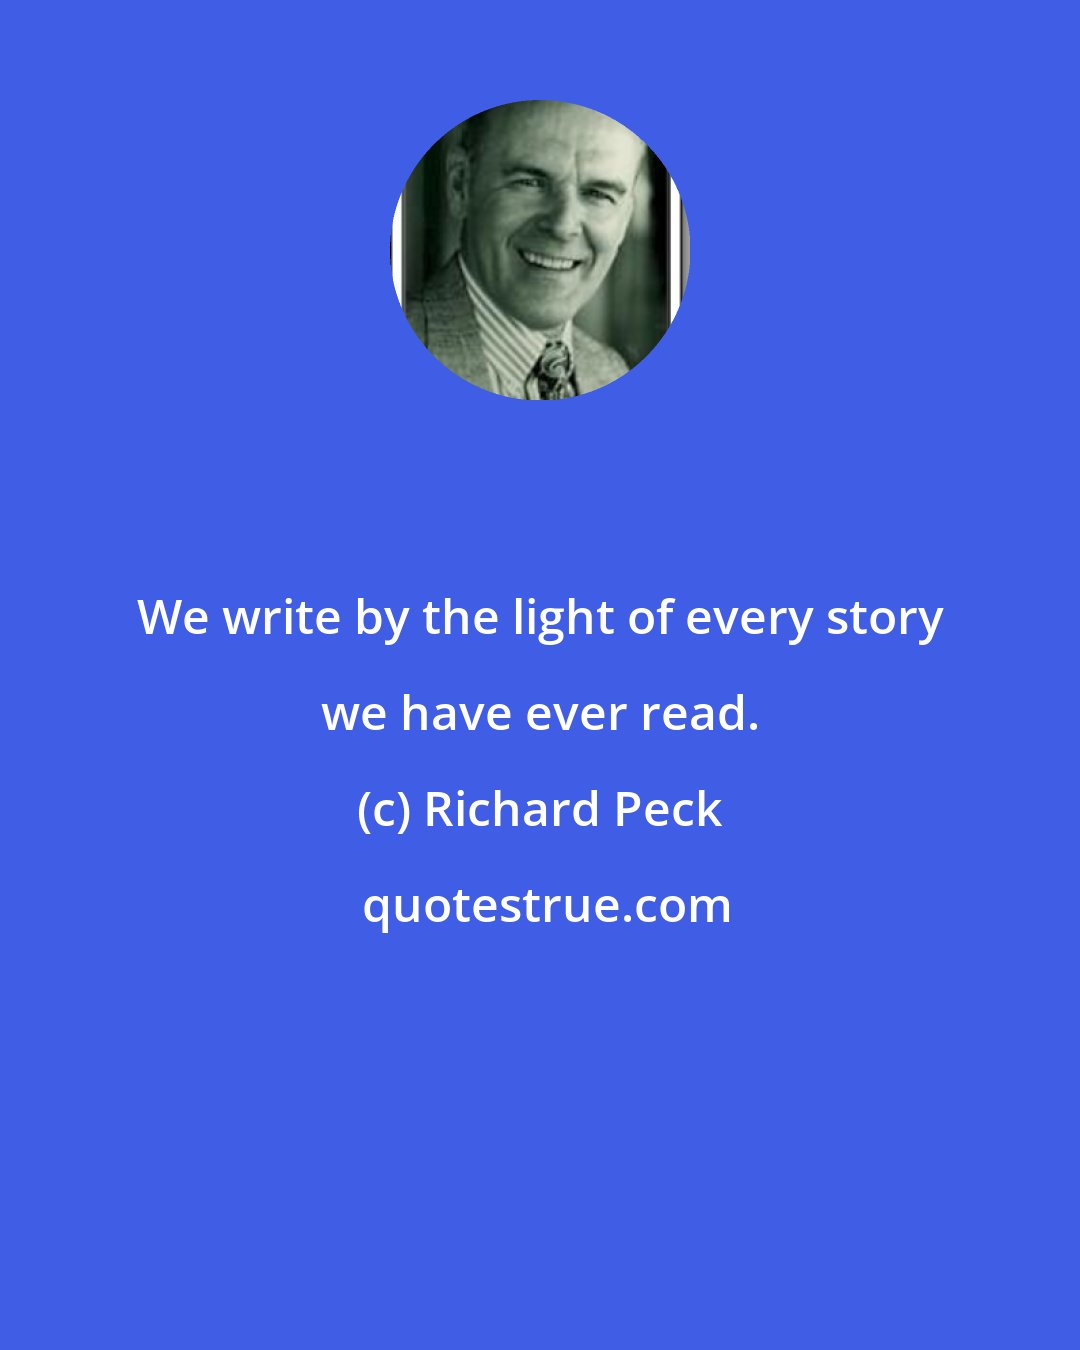 Richard Peck: We write by the light of every story we have ever read.